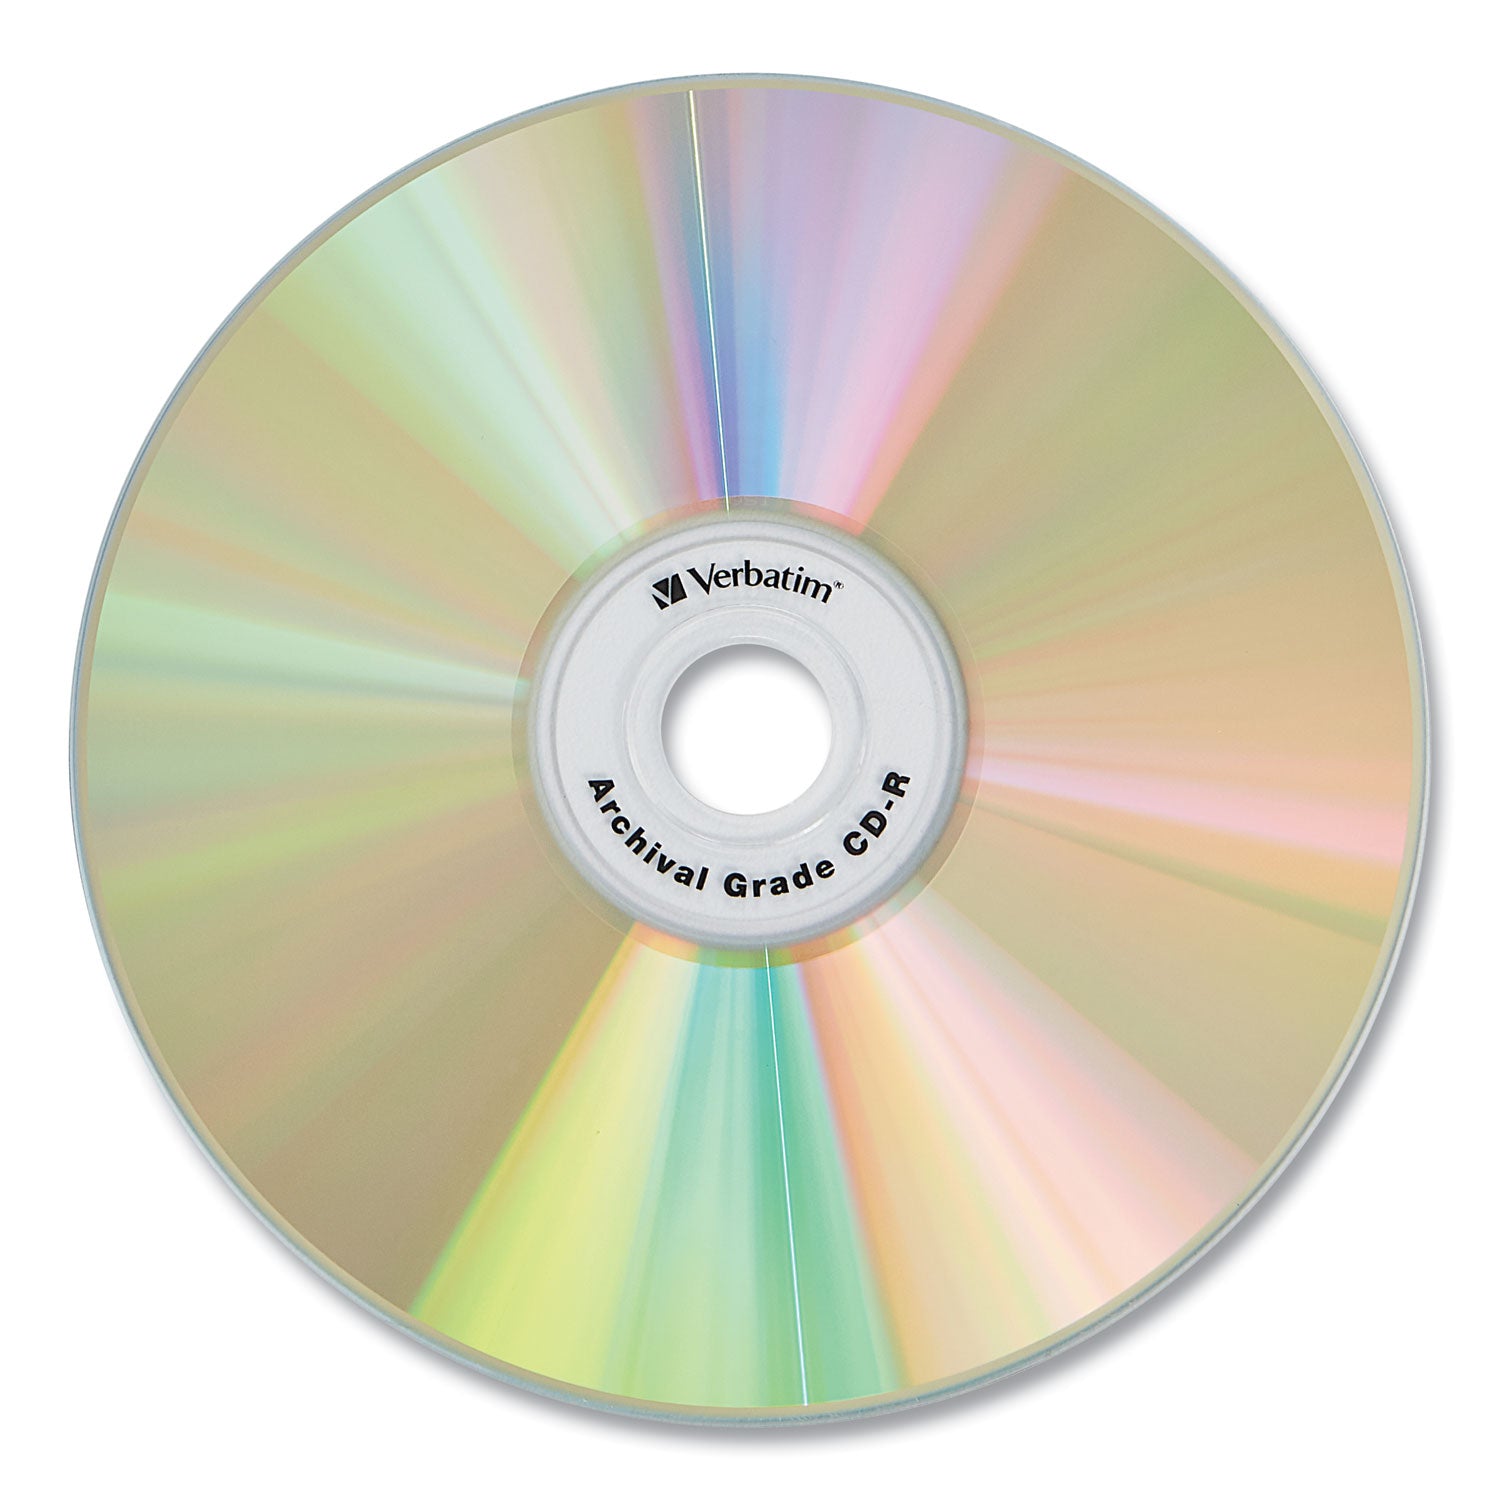 CD-R Archival Grade Recordable Disc, 700 MB/80 min, 52x, Spindle, Gold, 50/Pack - 